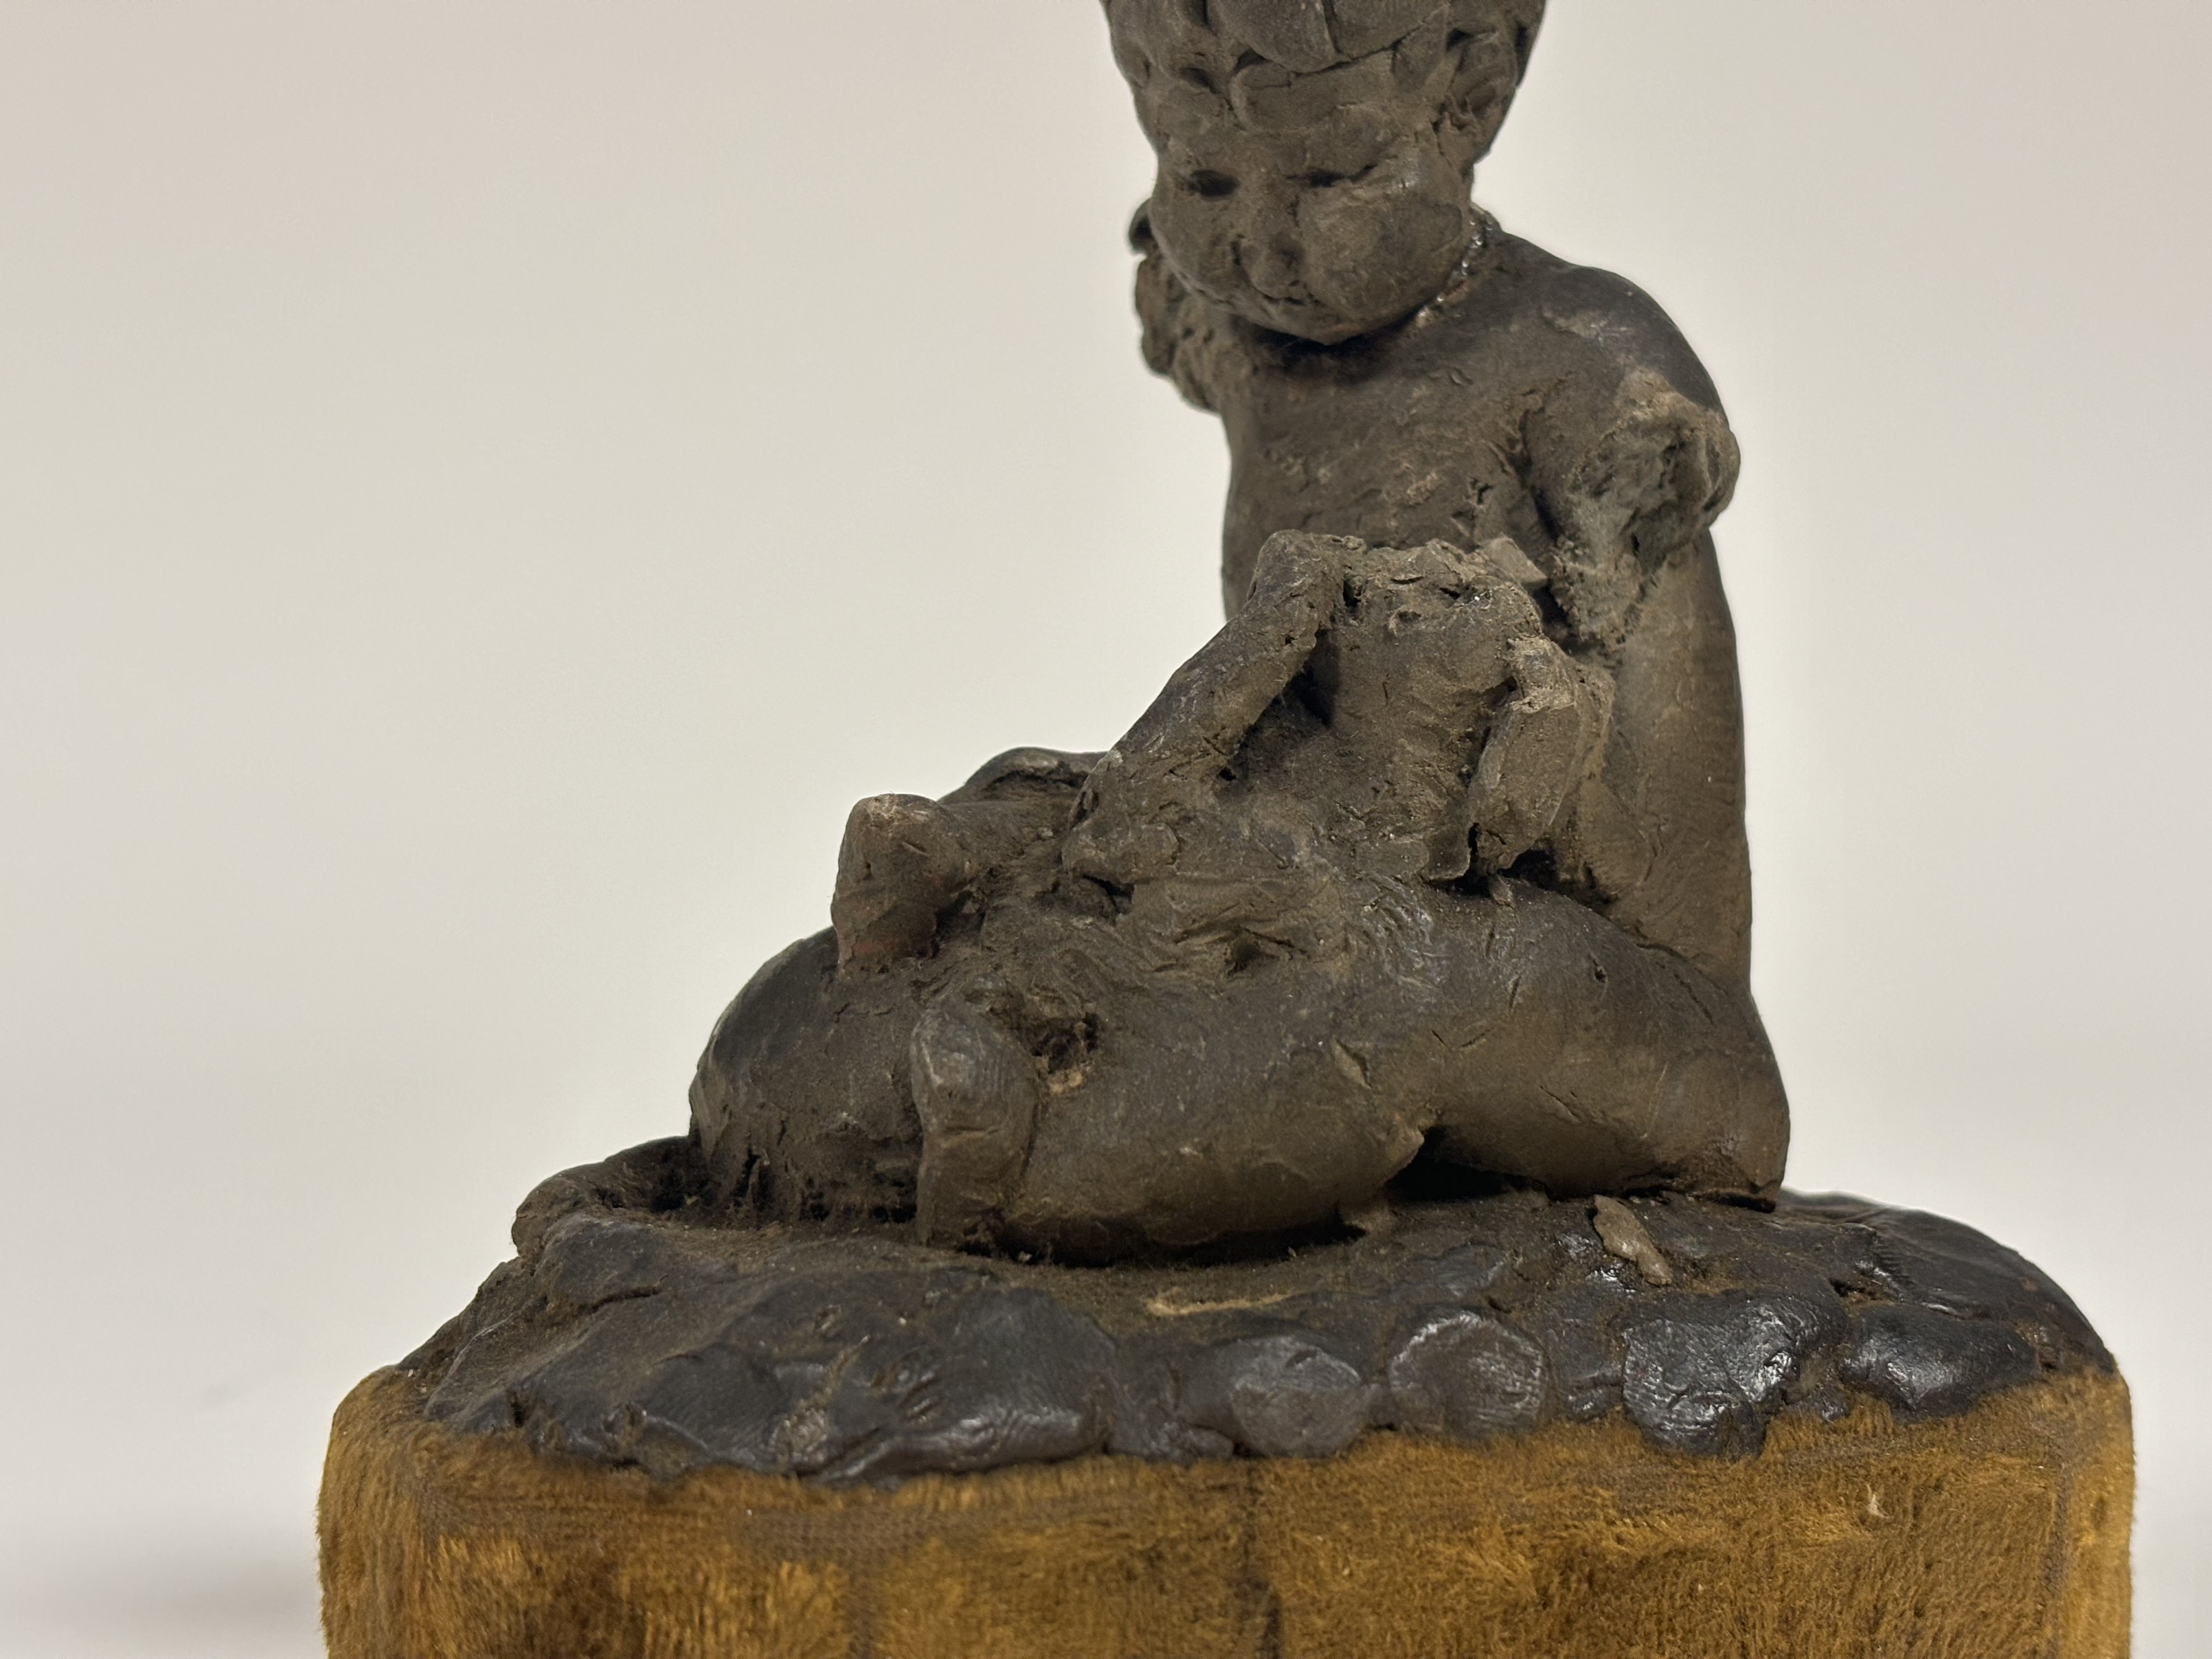 Attributed to Sophia Rosamond Praeger M.B.E. (Irish, 1867-1954), a wax maquette of a Child with a - Image 6 of 6